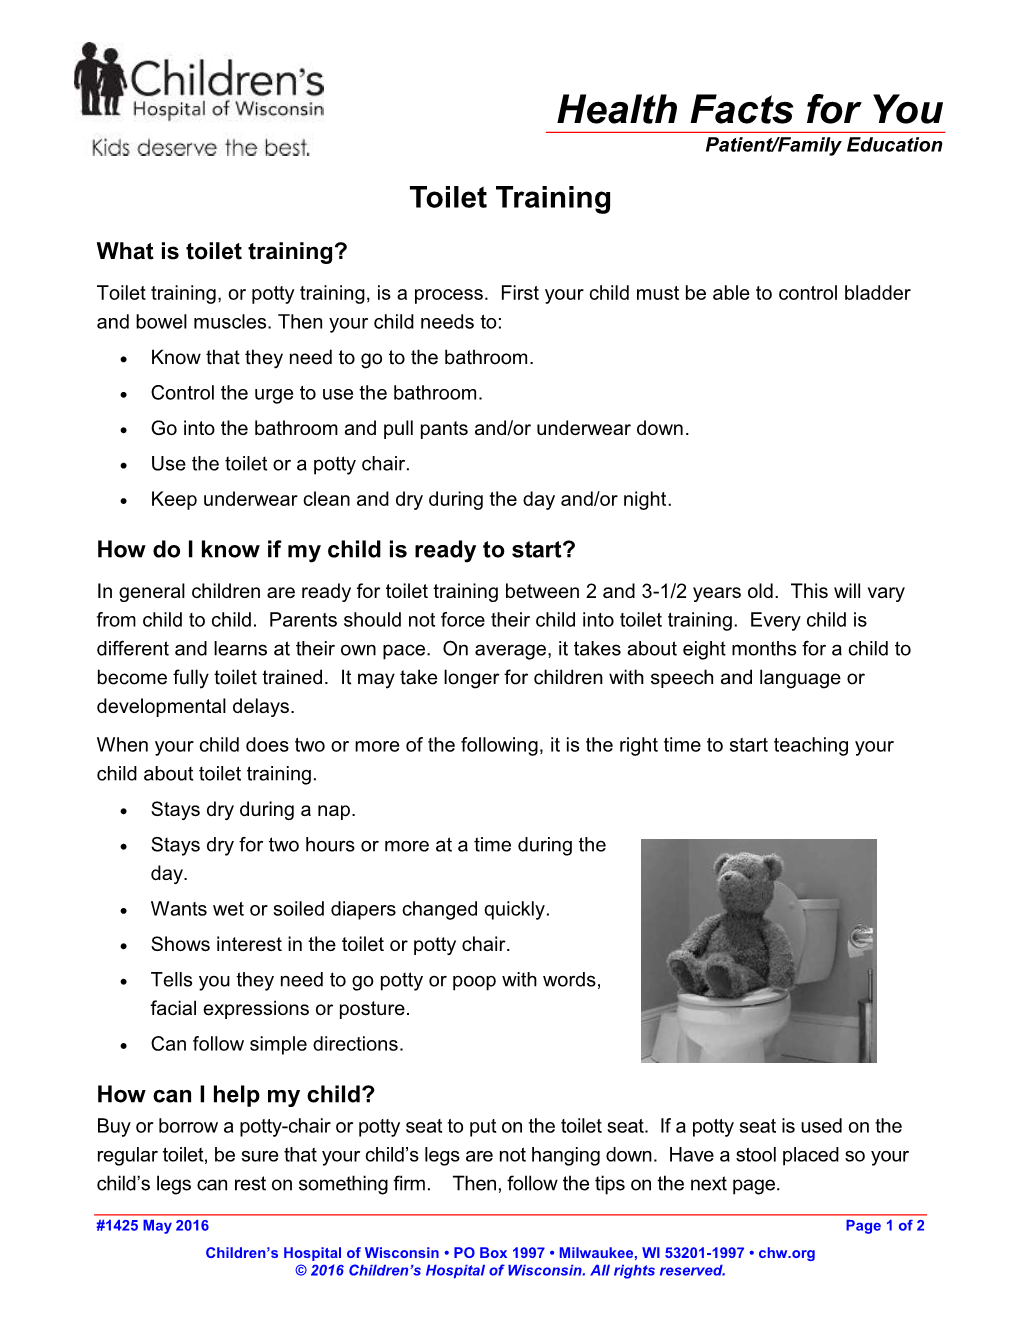 Toilet Training. Every Child Is Different and Learns at Their Own Pace